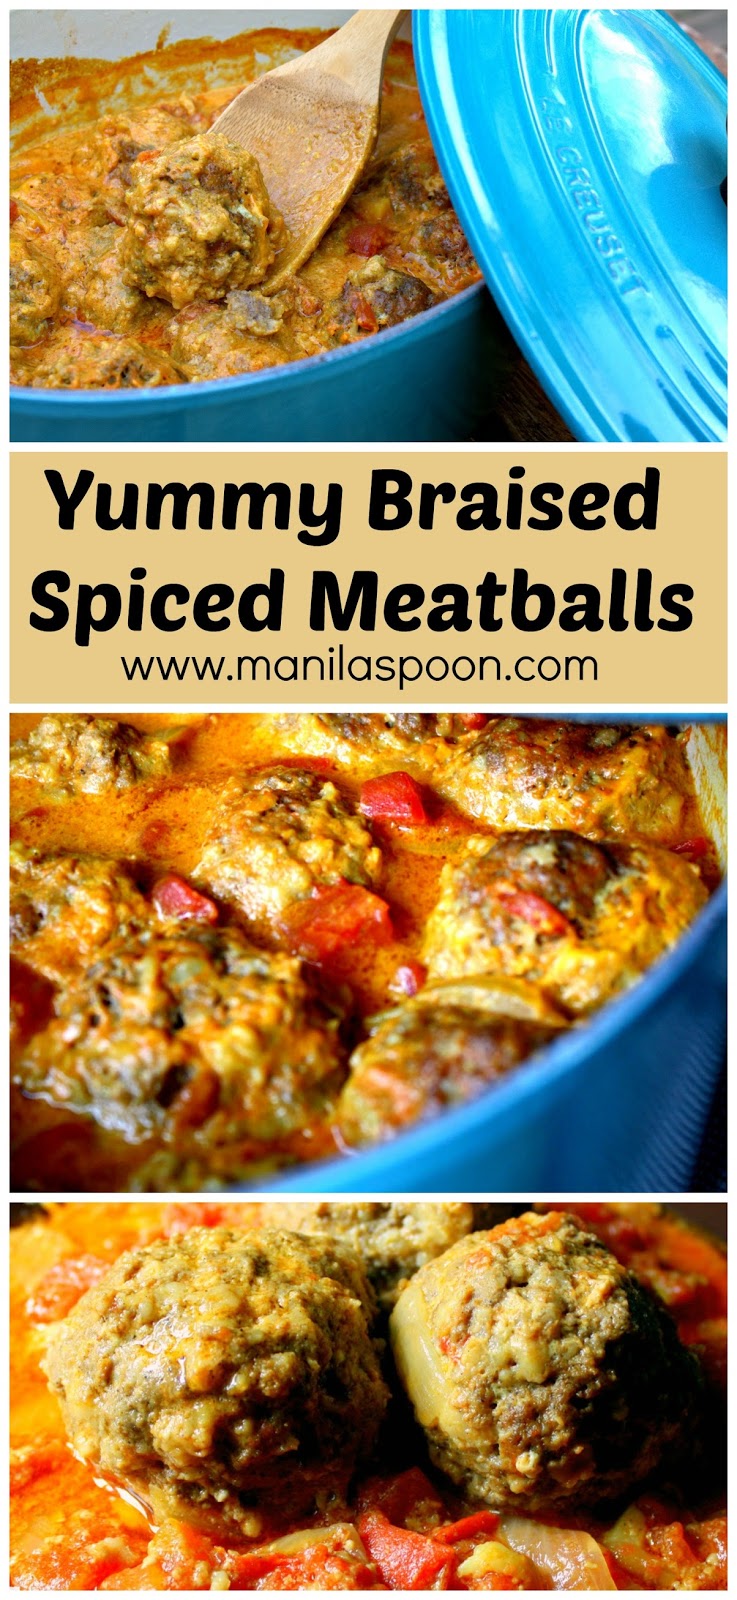 Spiced with cinnamon and coriander and then slowly simmered in a creamy tomato curry sauce make this dish so flavorful and delicious! Giant Meatballs - Frikadelles - South African Braised Meatballs - this is absolutely yummy! #frikadelles #braised #meatballs #southafrica #frikkadels